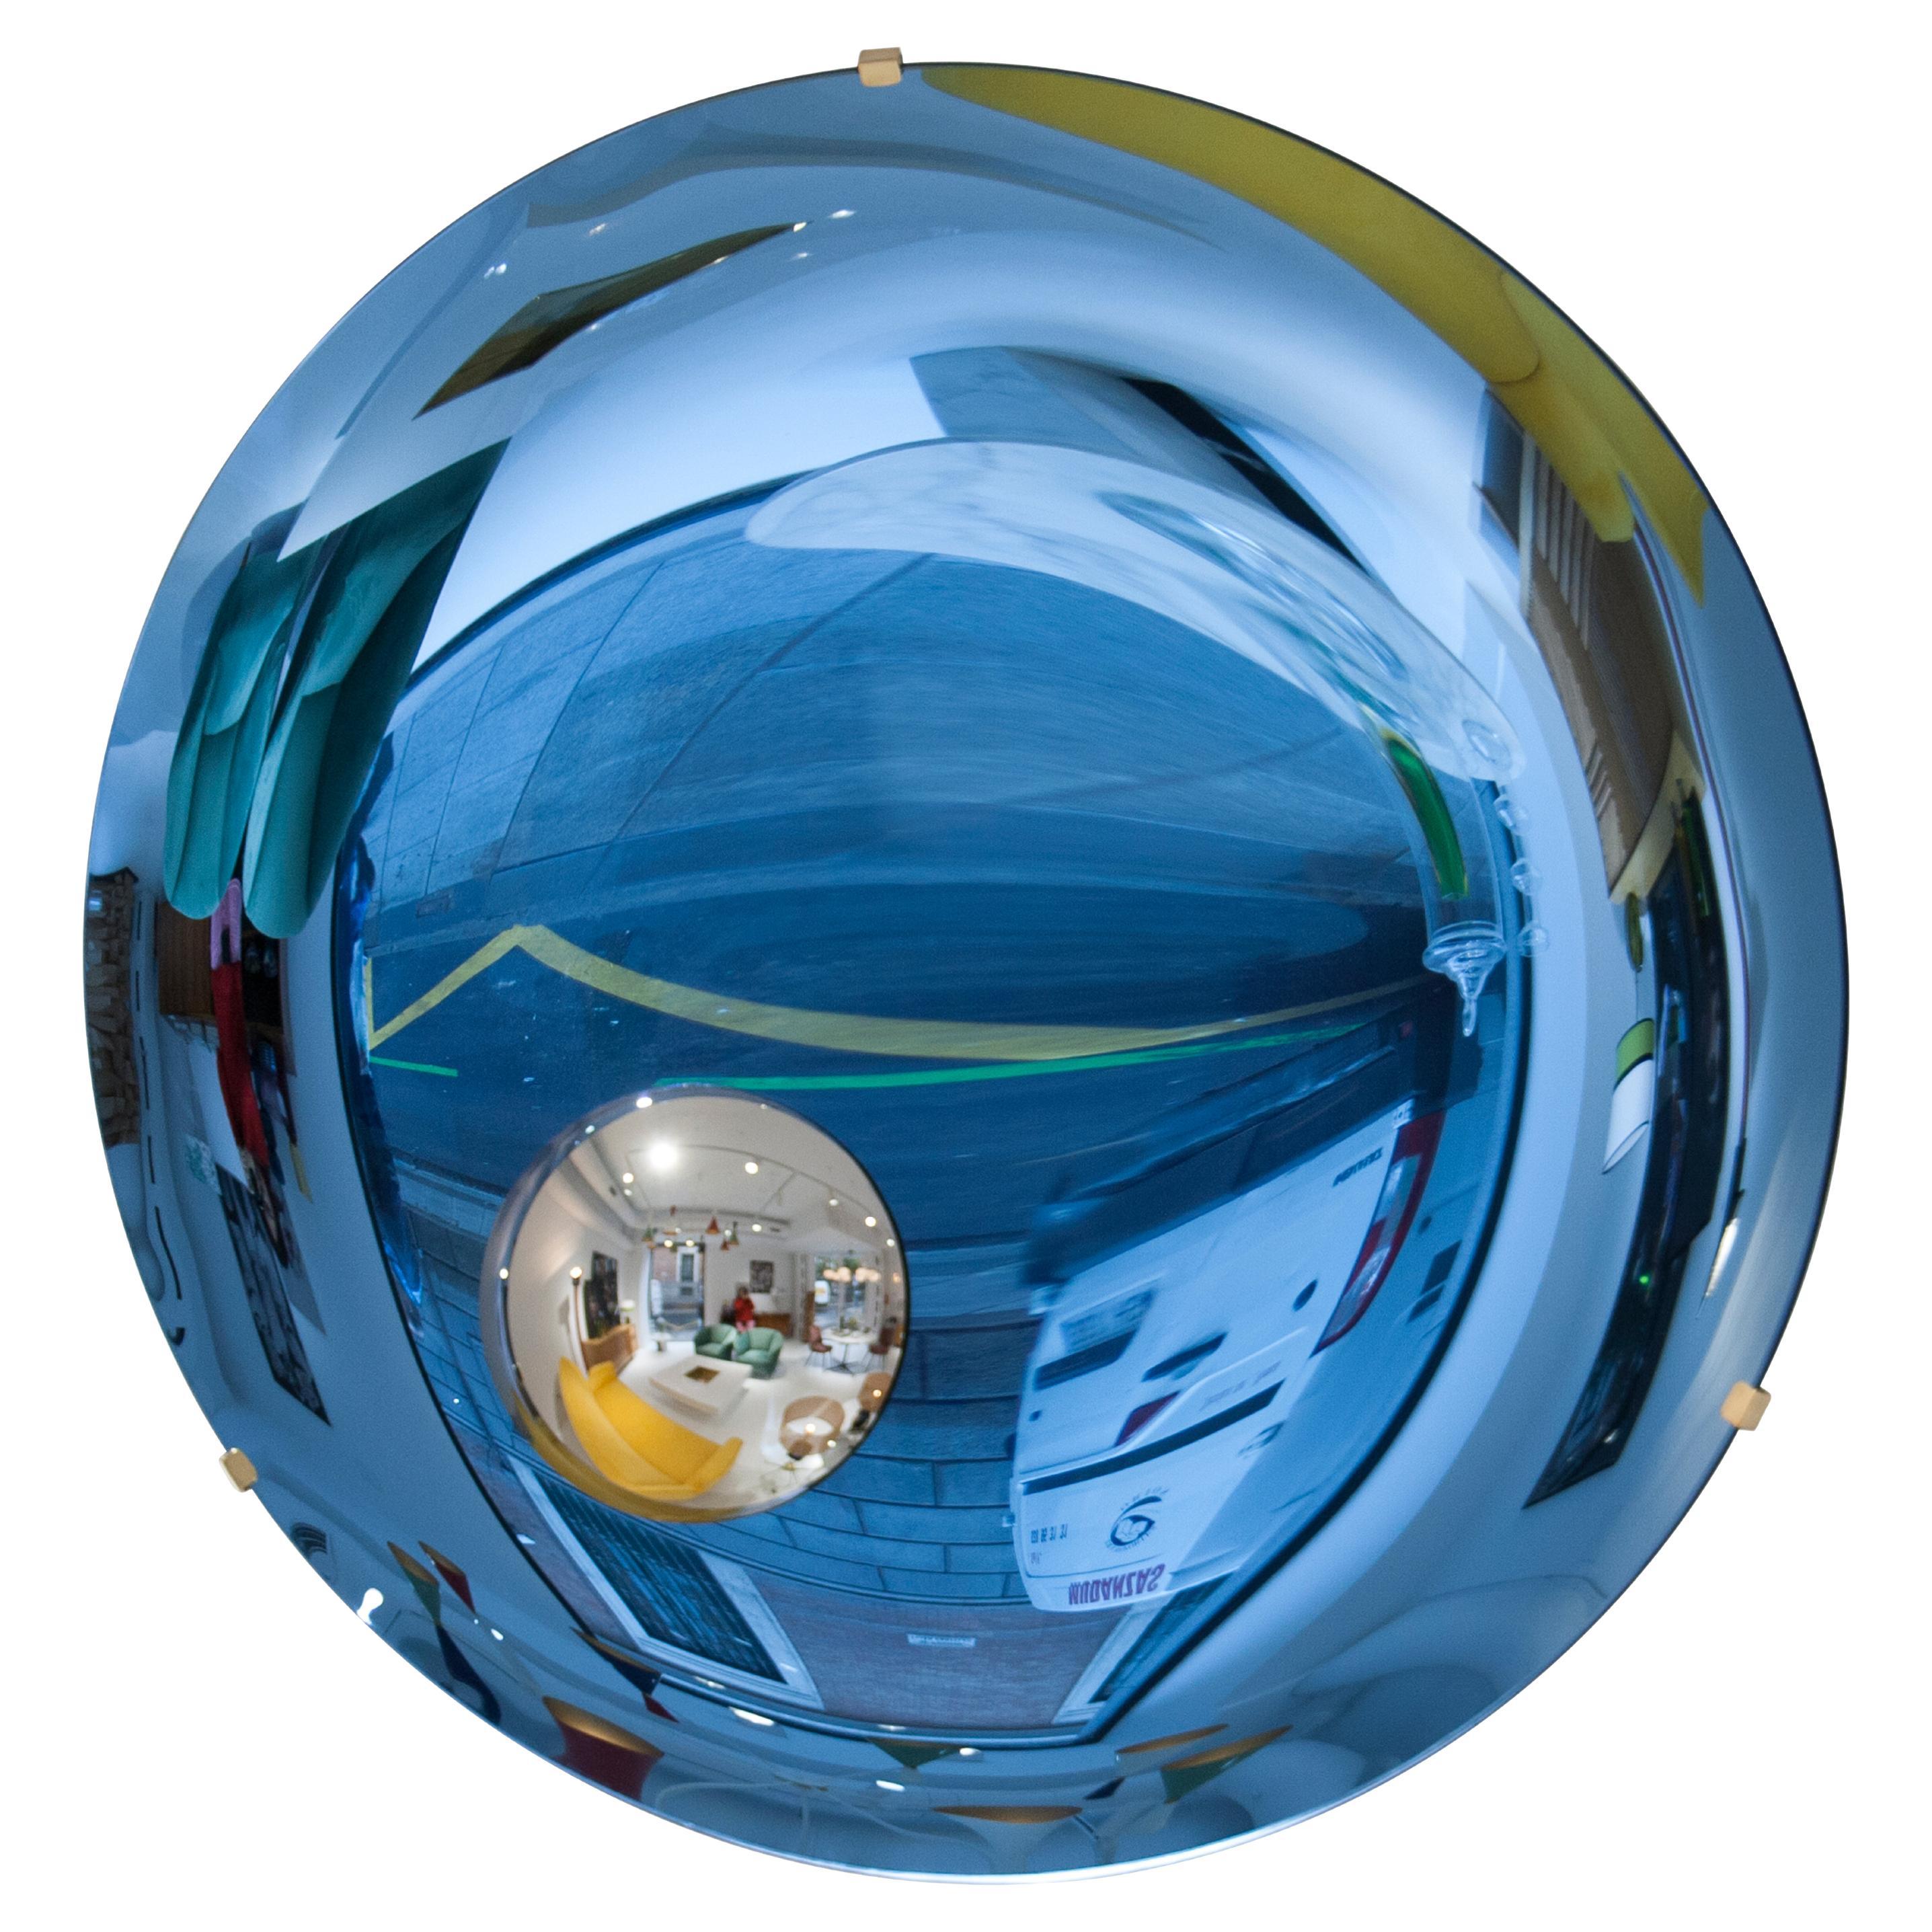 Italian Blue Concave Hand-Crafted Murano Glass Rounded Mirror, Italy, 2020